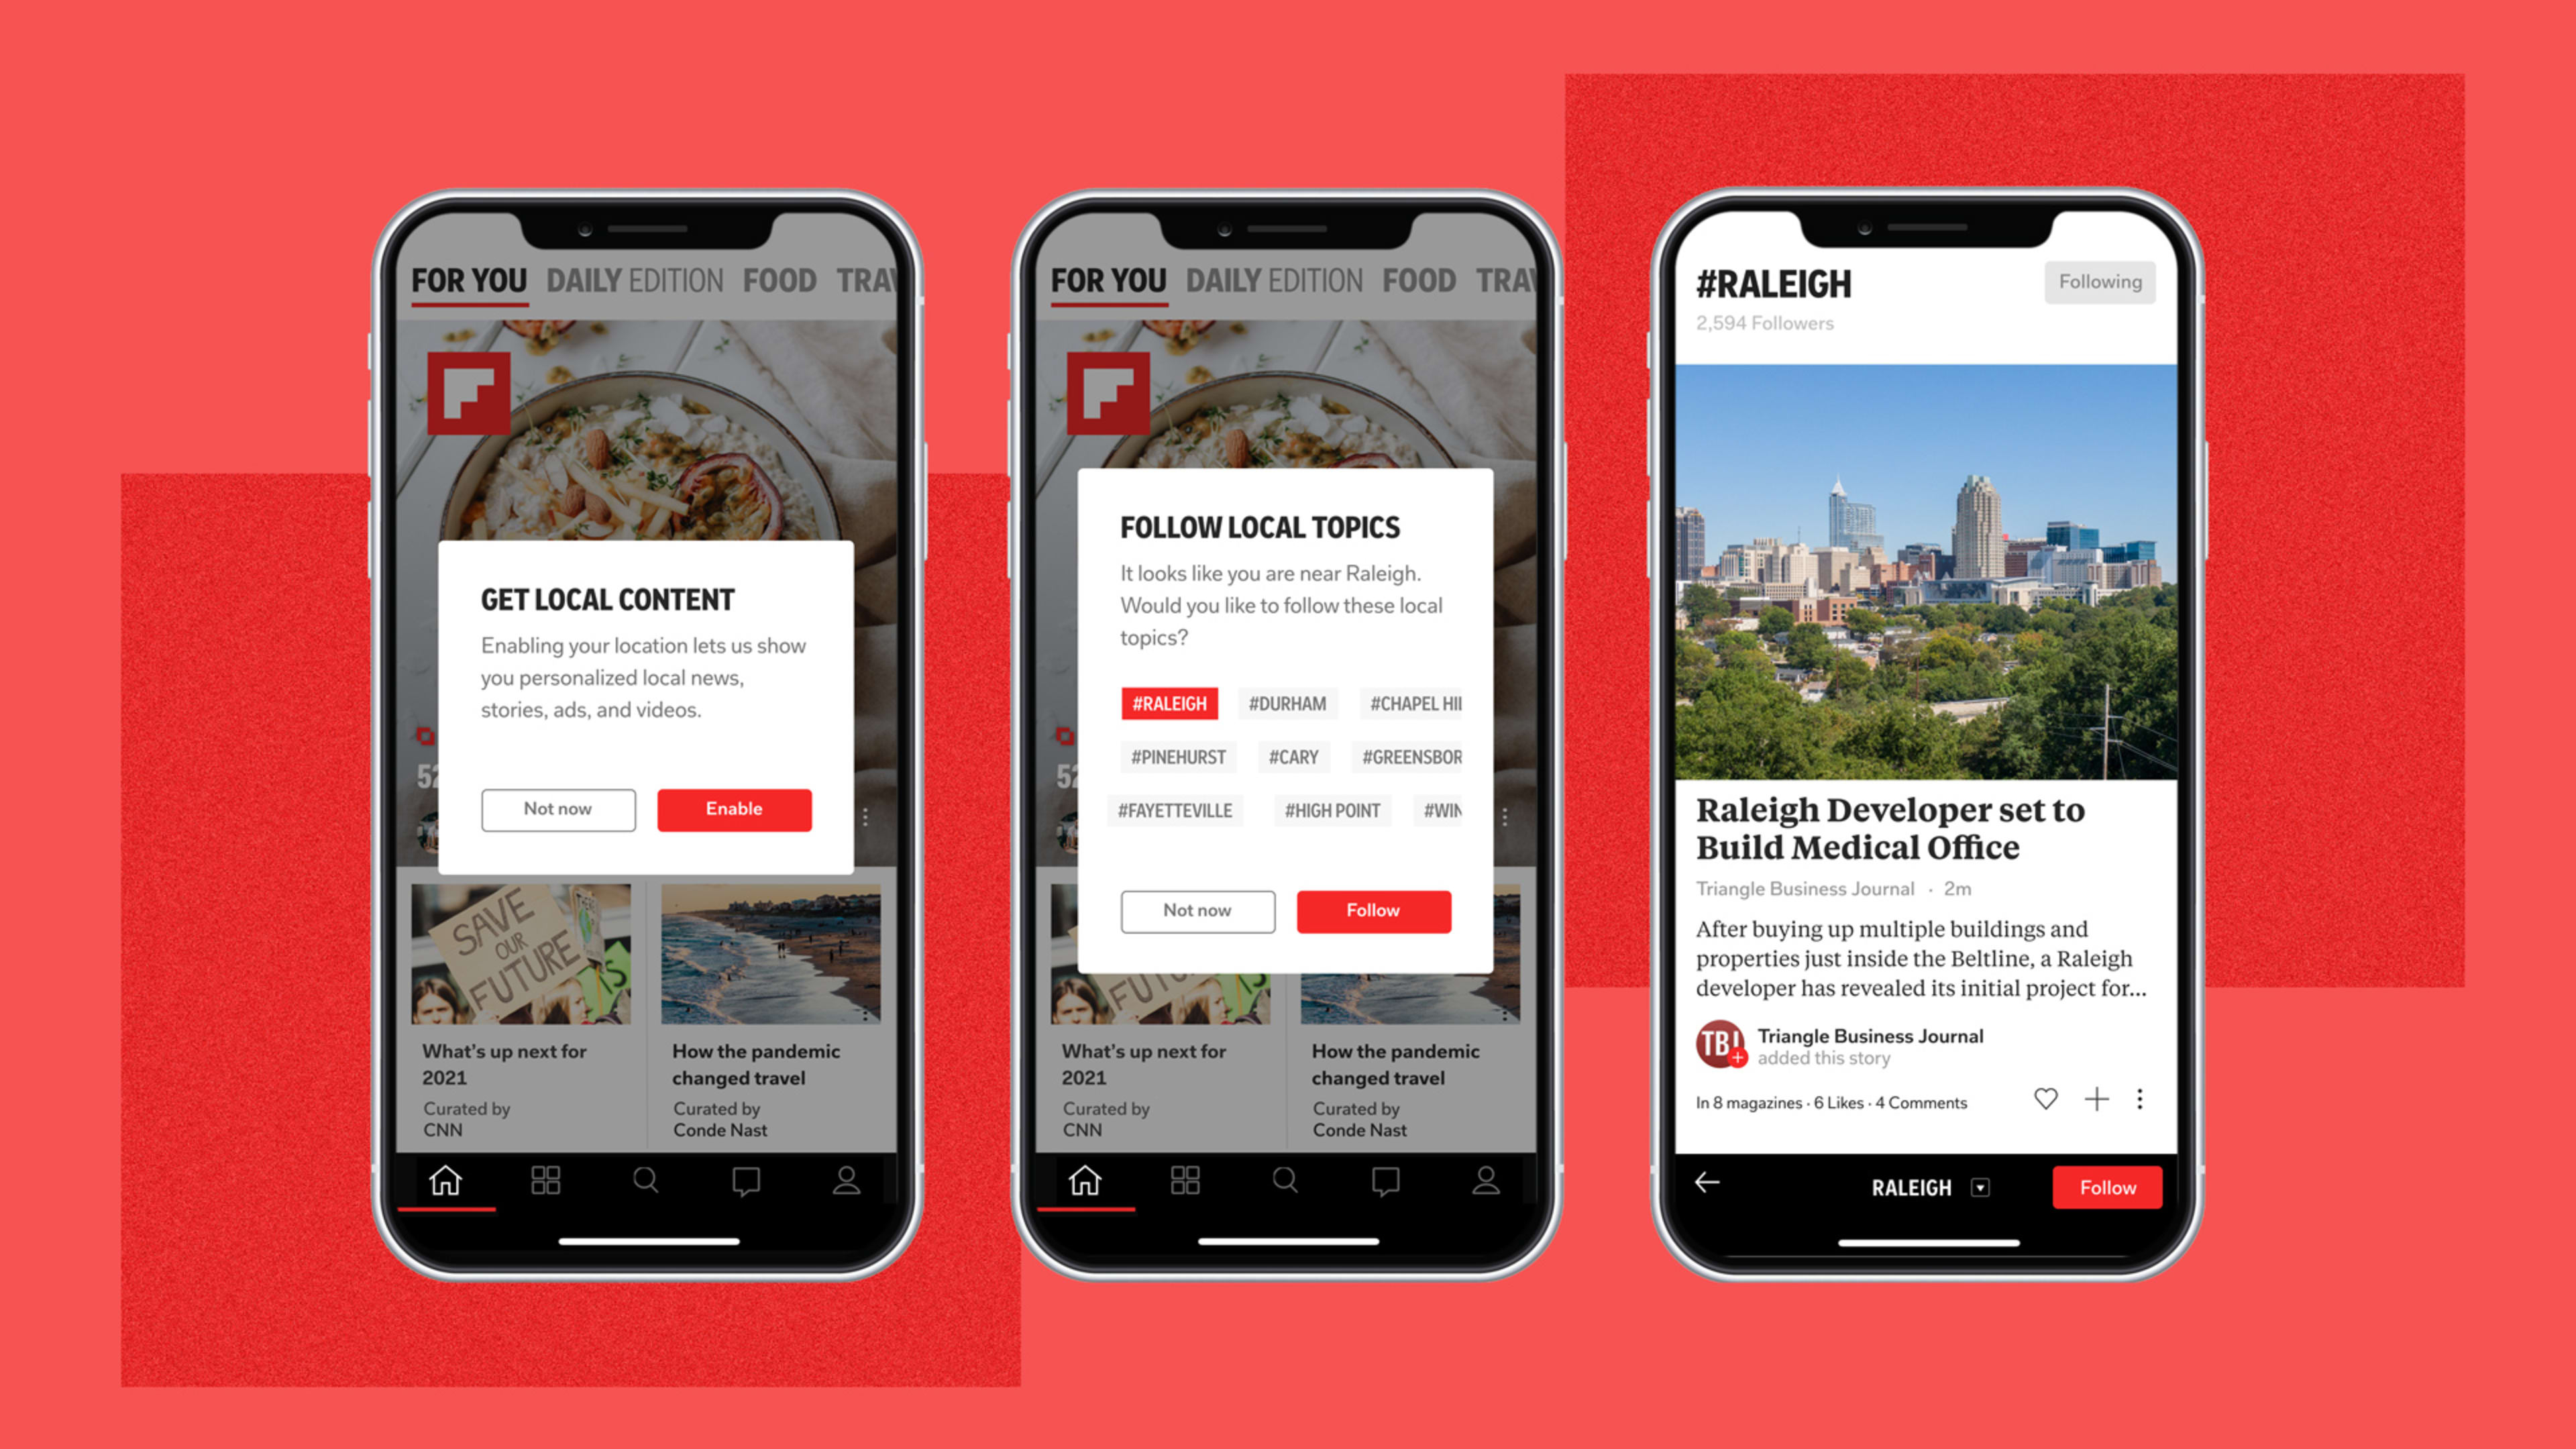 Flipboard now lets you follow local news for 1,000+ cities and towns